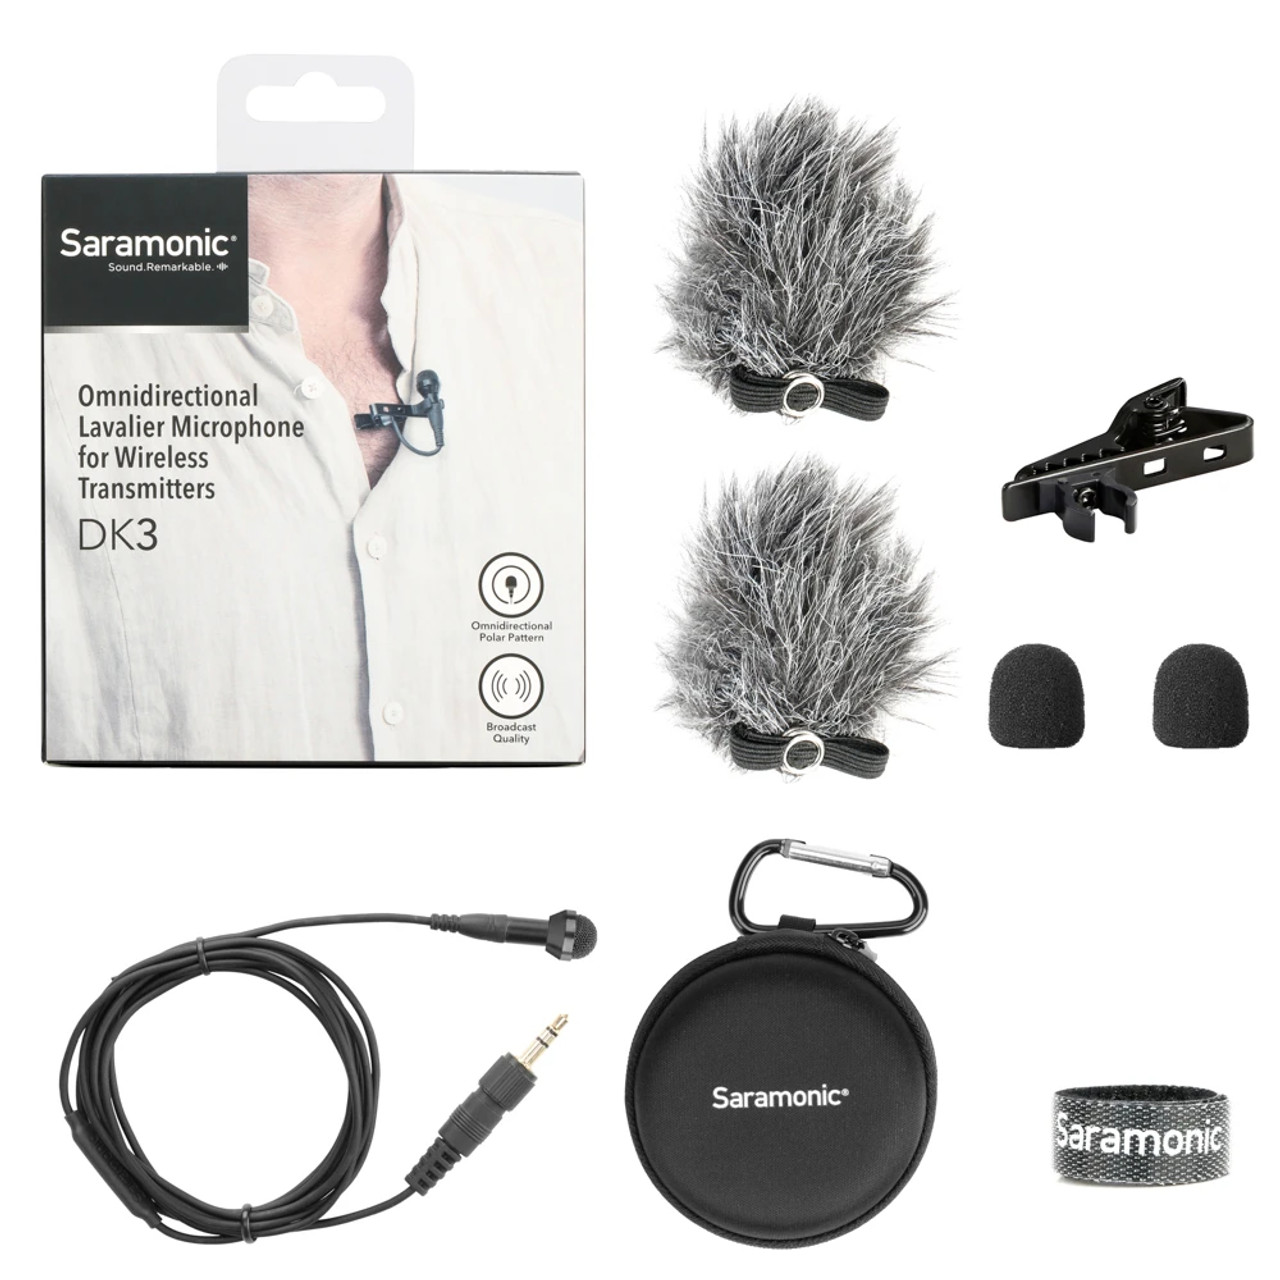 Saramonic DK3A Premium 4mm Omnidirectional Lavalier Microphone for Wireless Transmitters & Recorders w/ 3.5mm